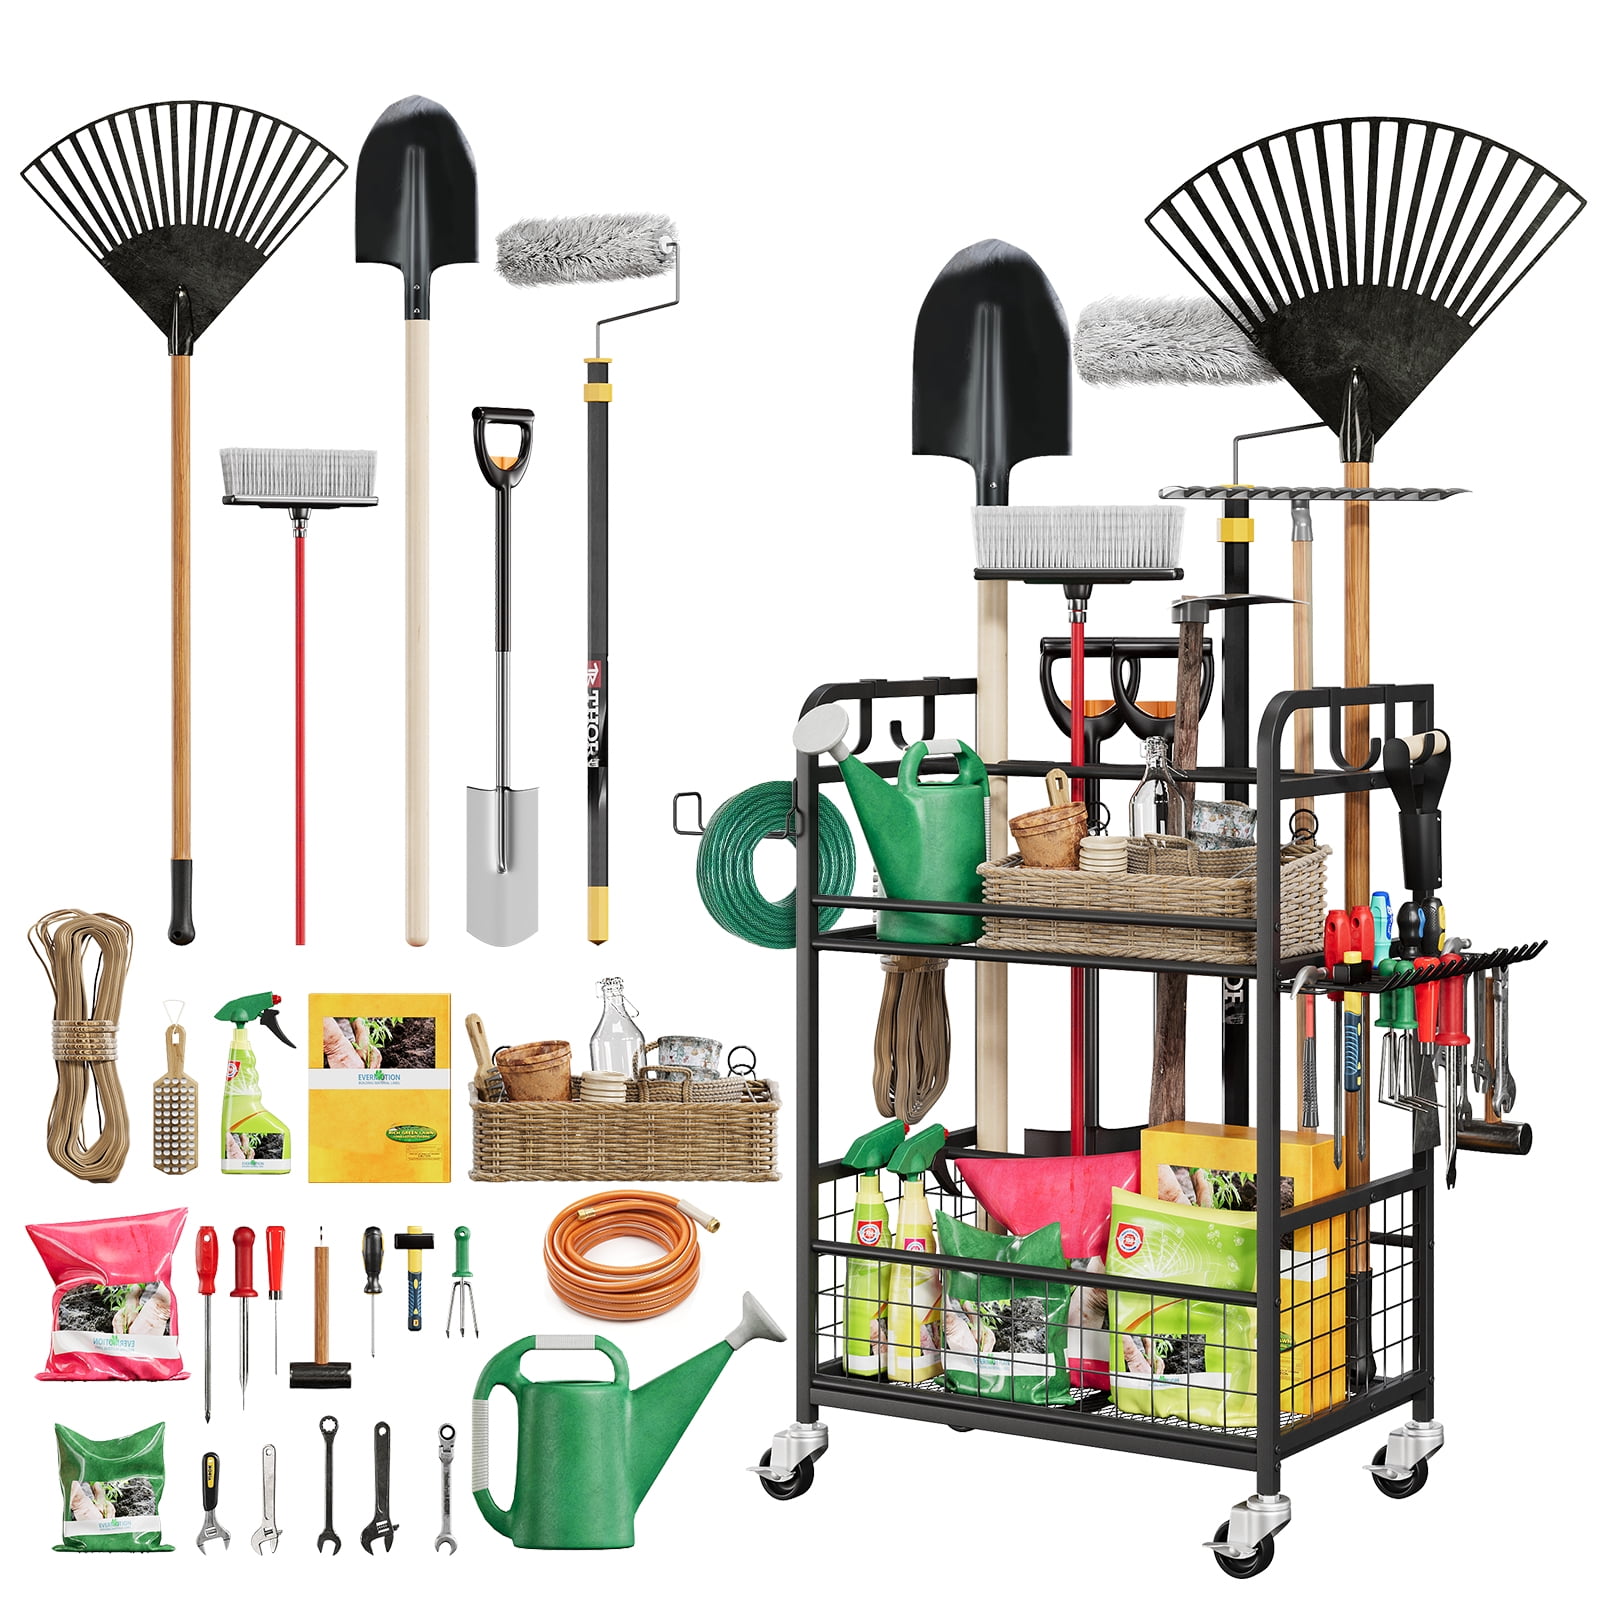 Storing Tools and Other Garden Items - The Backyard Gardener - ANR